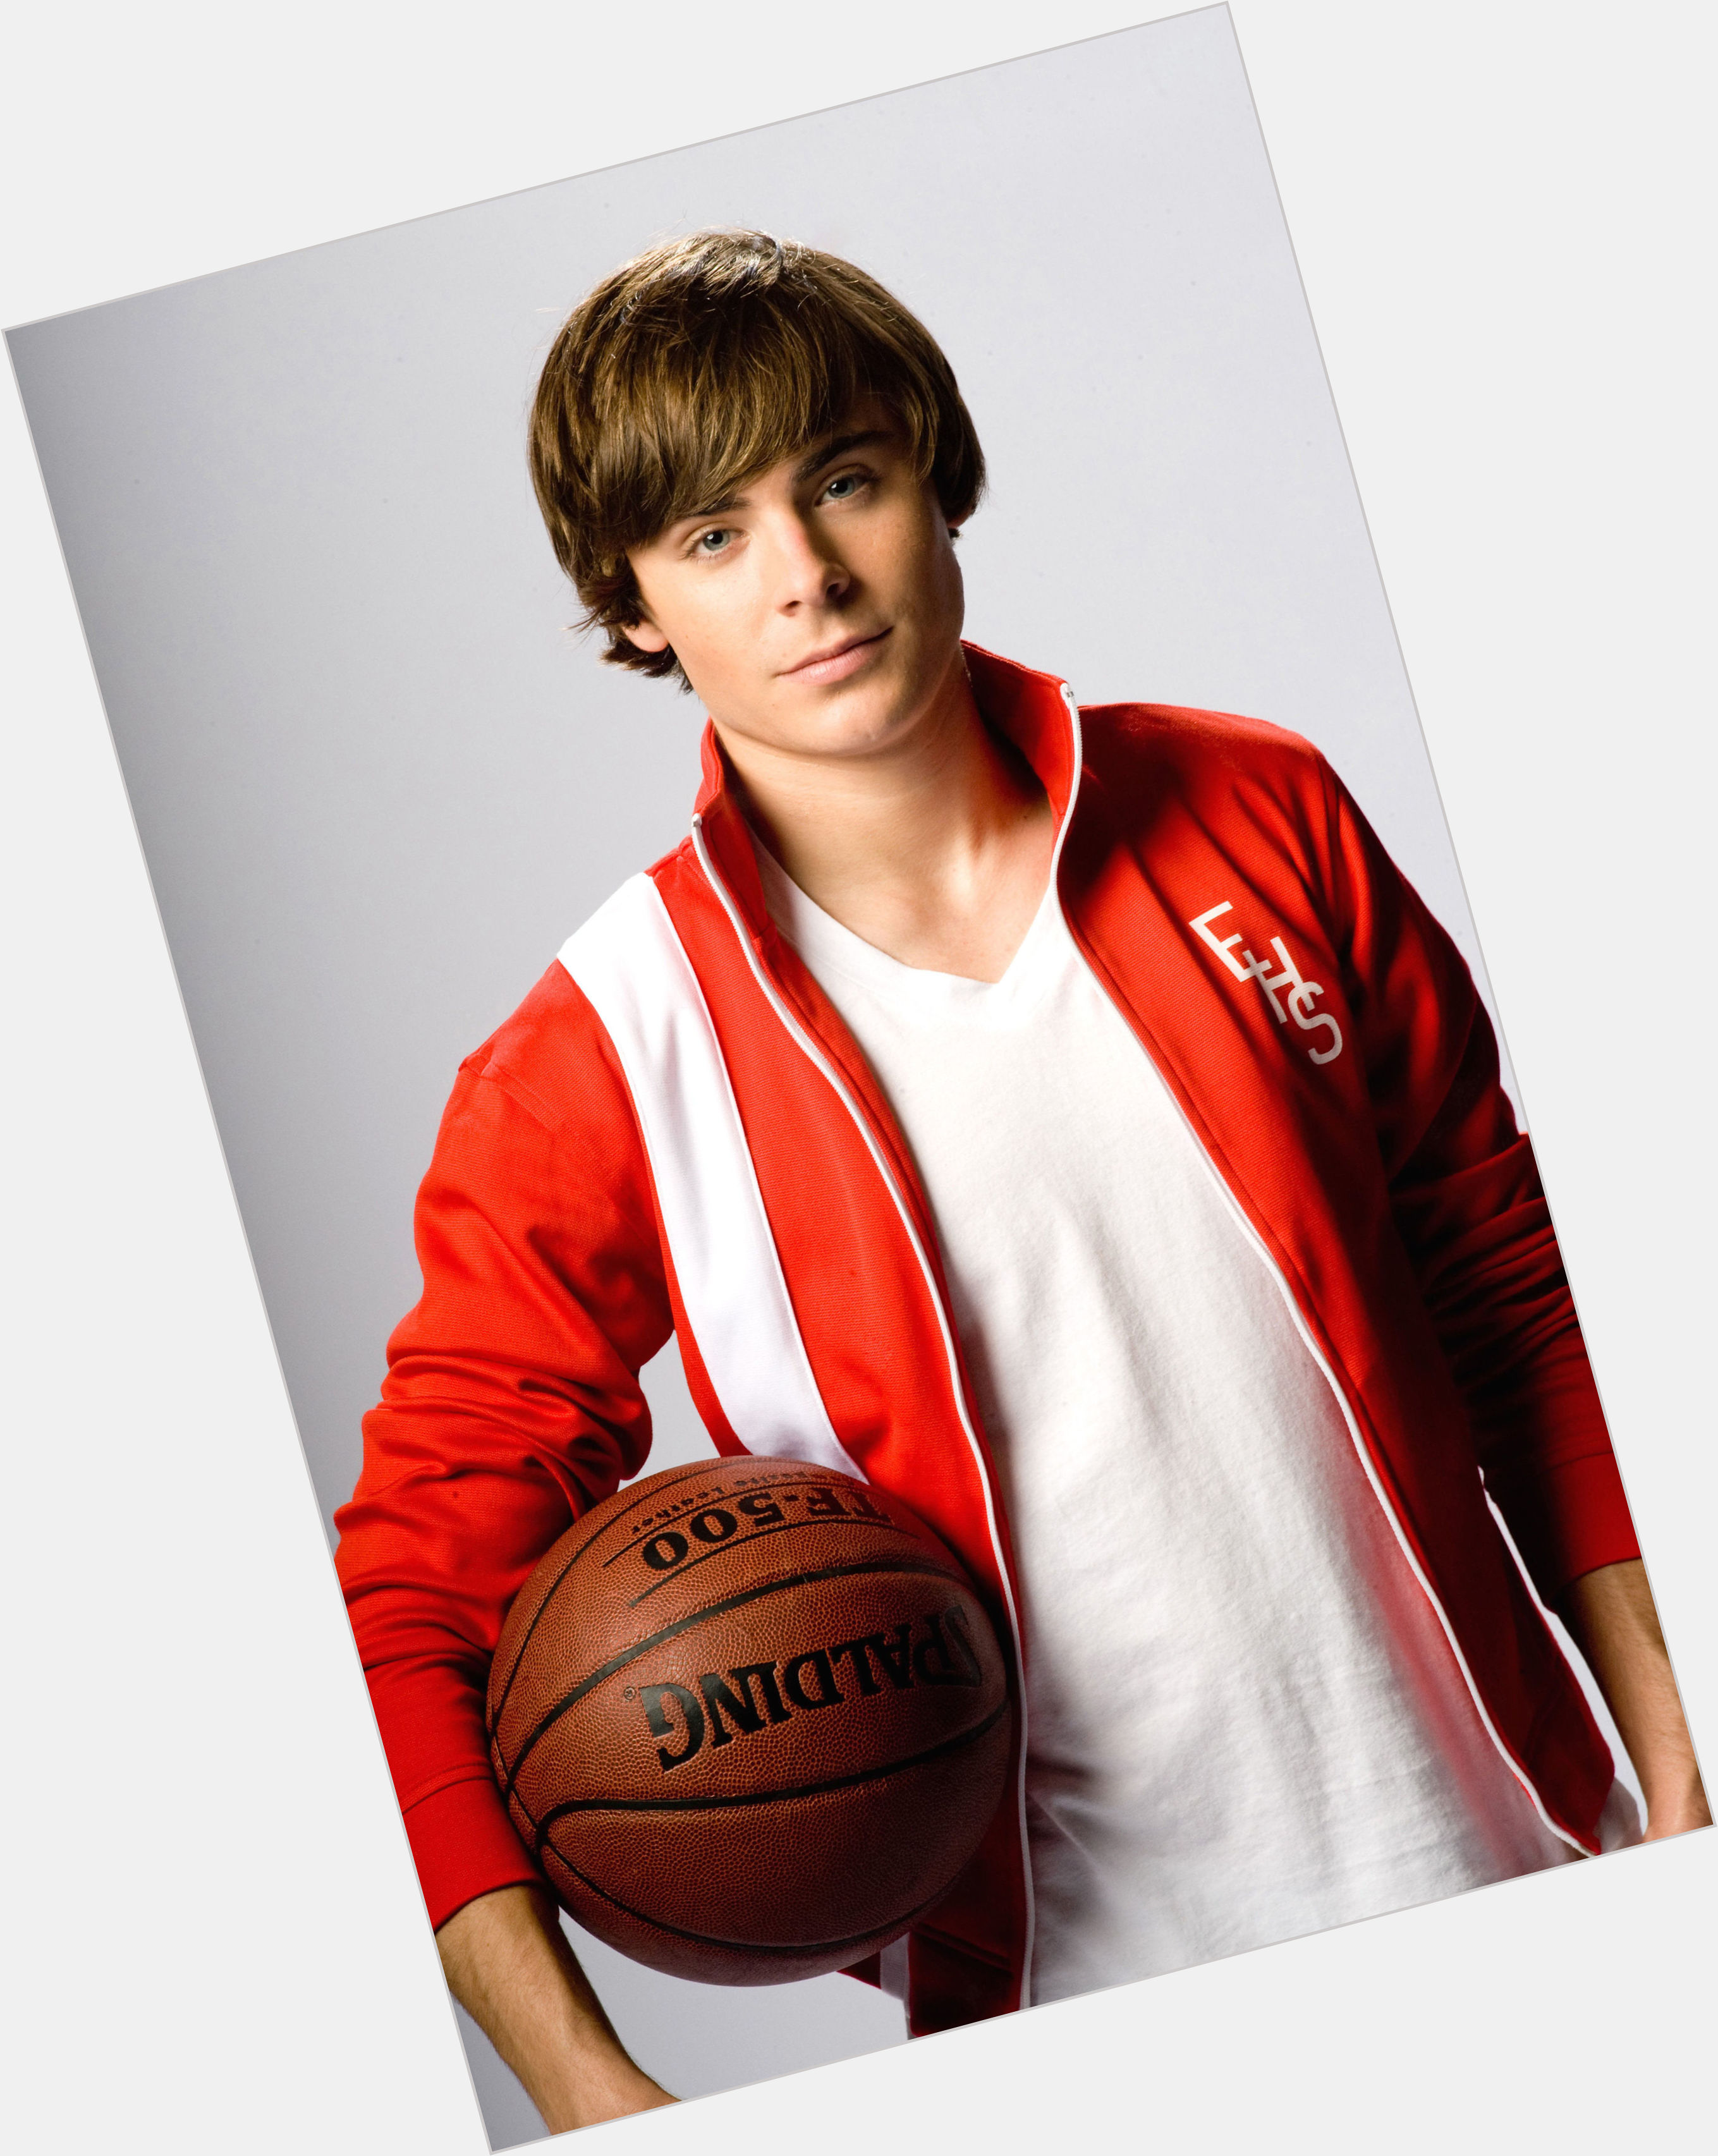 Troy Bolton young 11.jpg